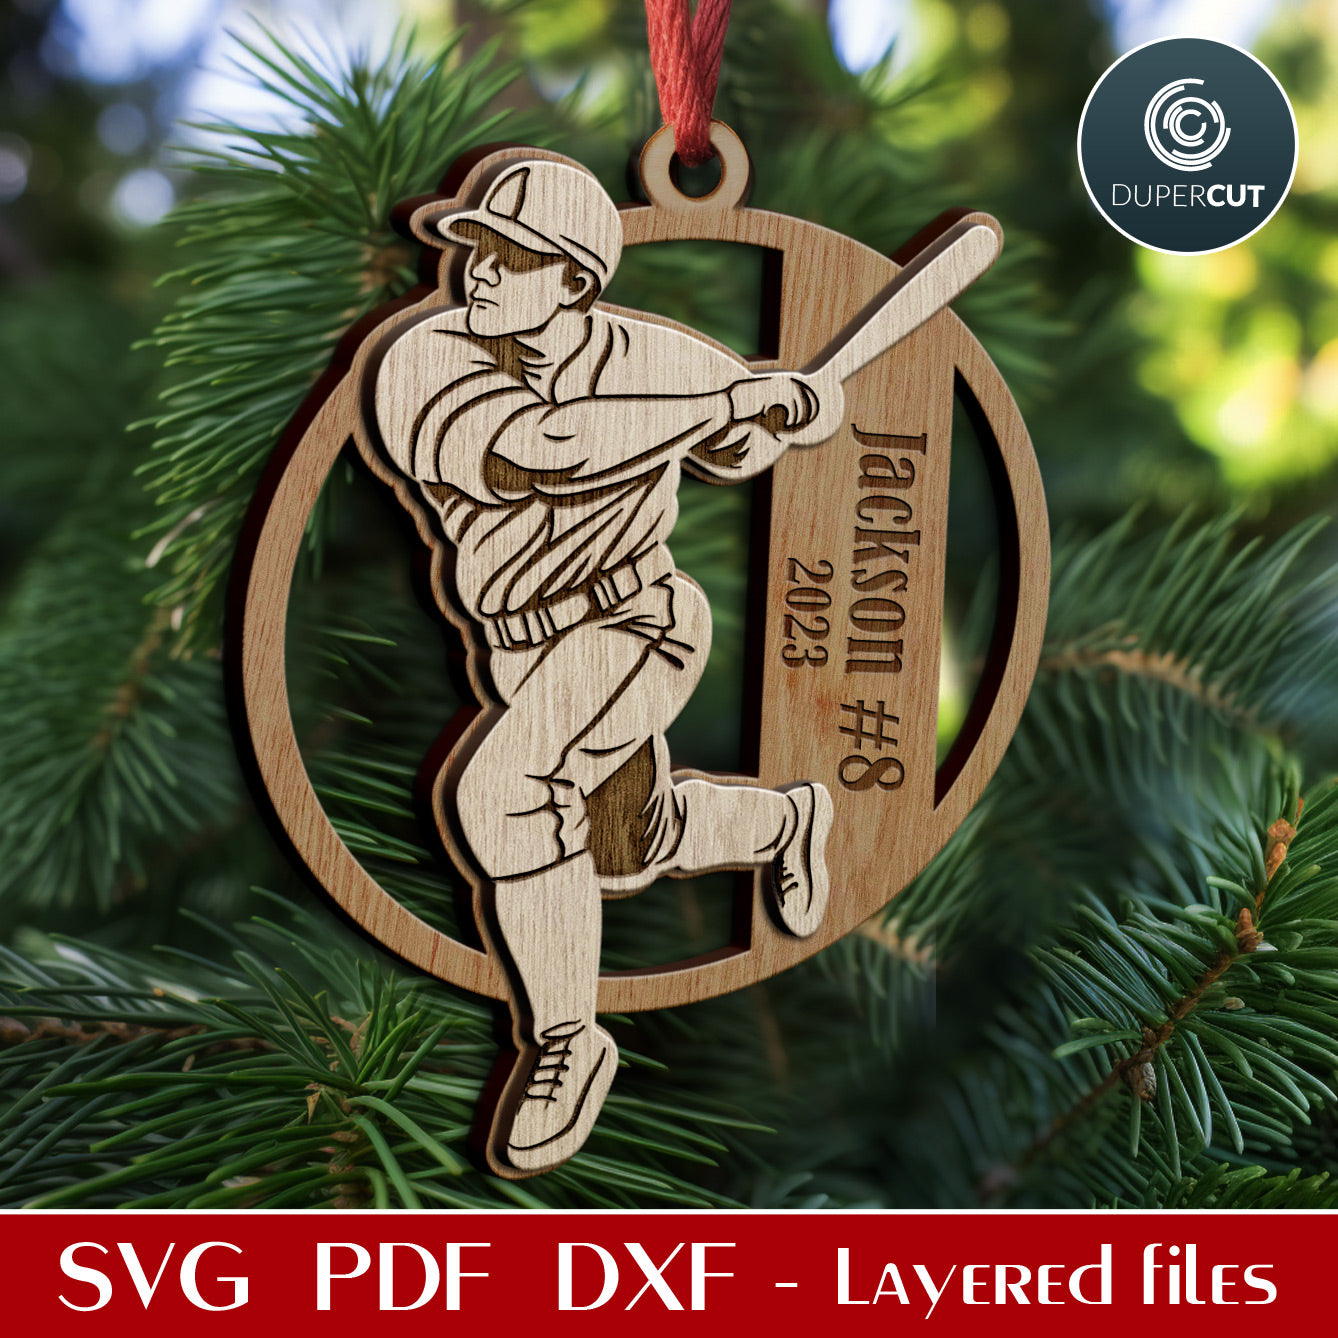 Baseball player sport personalized Christmas ornament, cut and engrave - SVG vector layered file for Glowforge, Cricut, CNC plasma machines by www.DuperCut.com